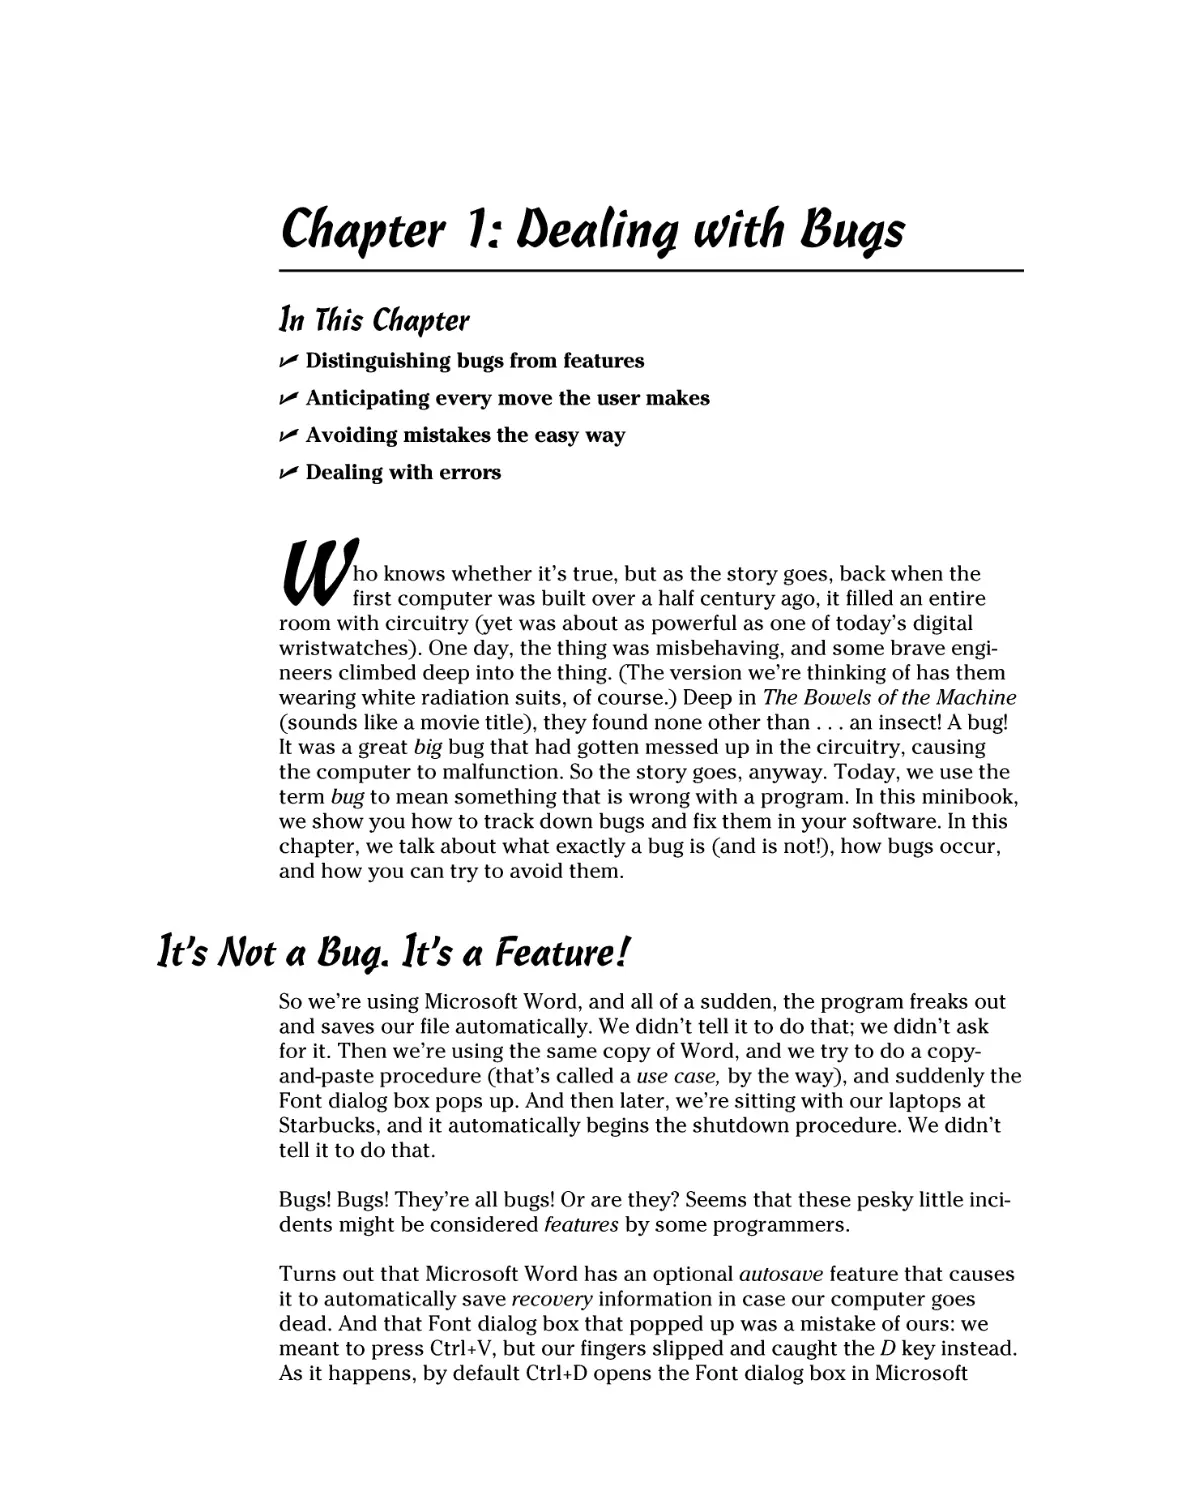 Chapter 1
It’s Not a Bug. It’s a Feature!